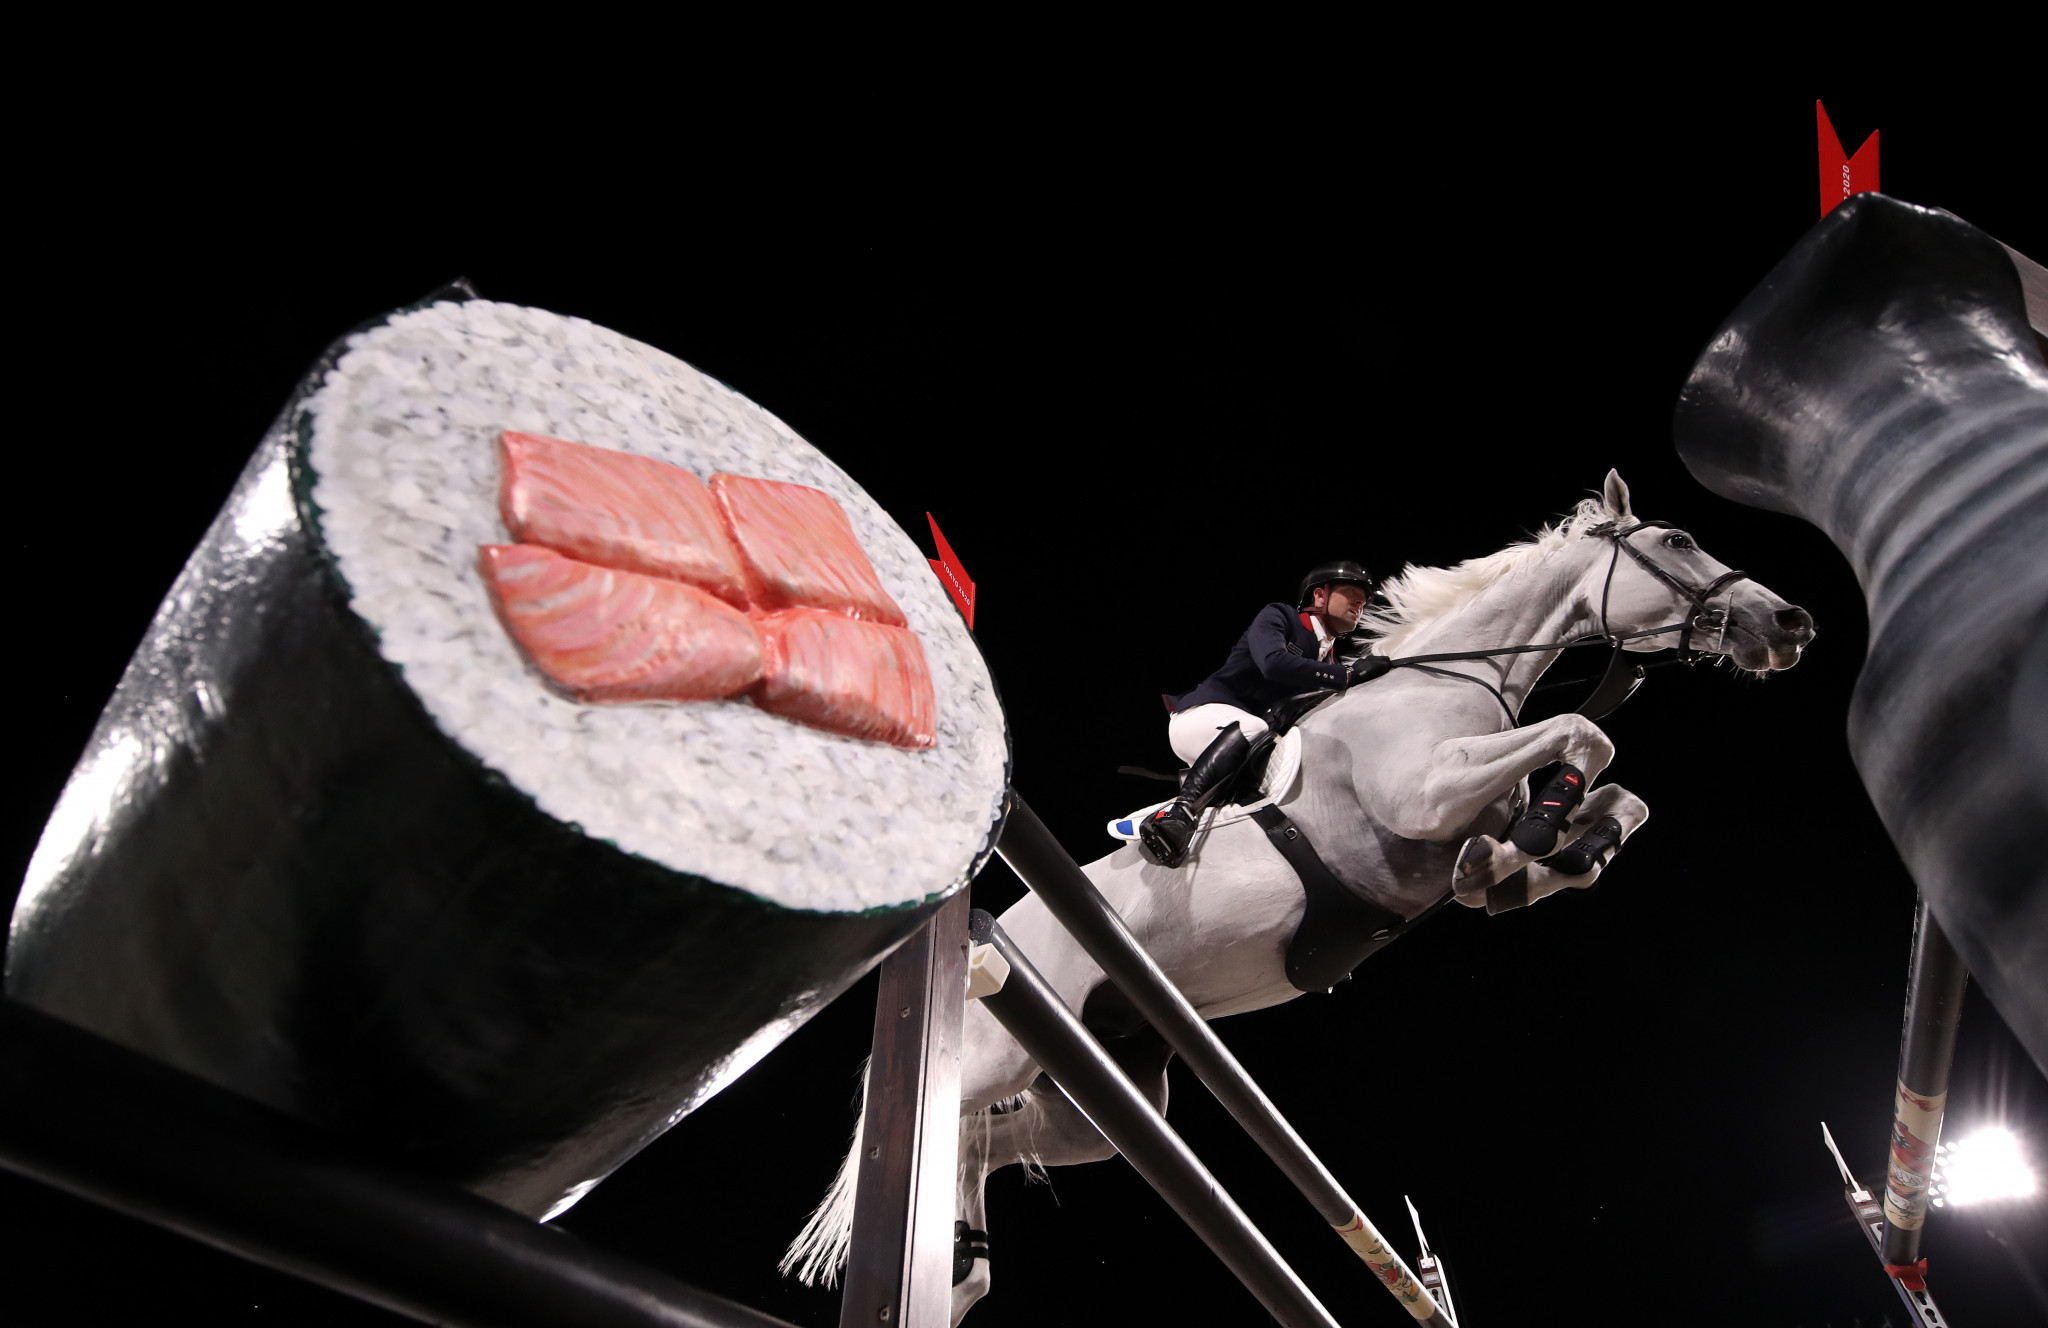 The equestrian team series will be renamed Longines League of Nations ©Getty Images